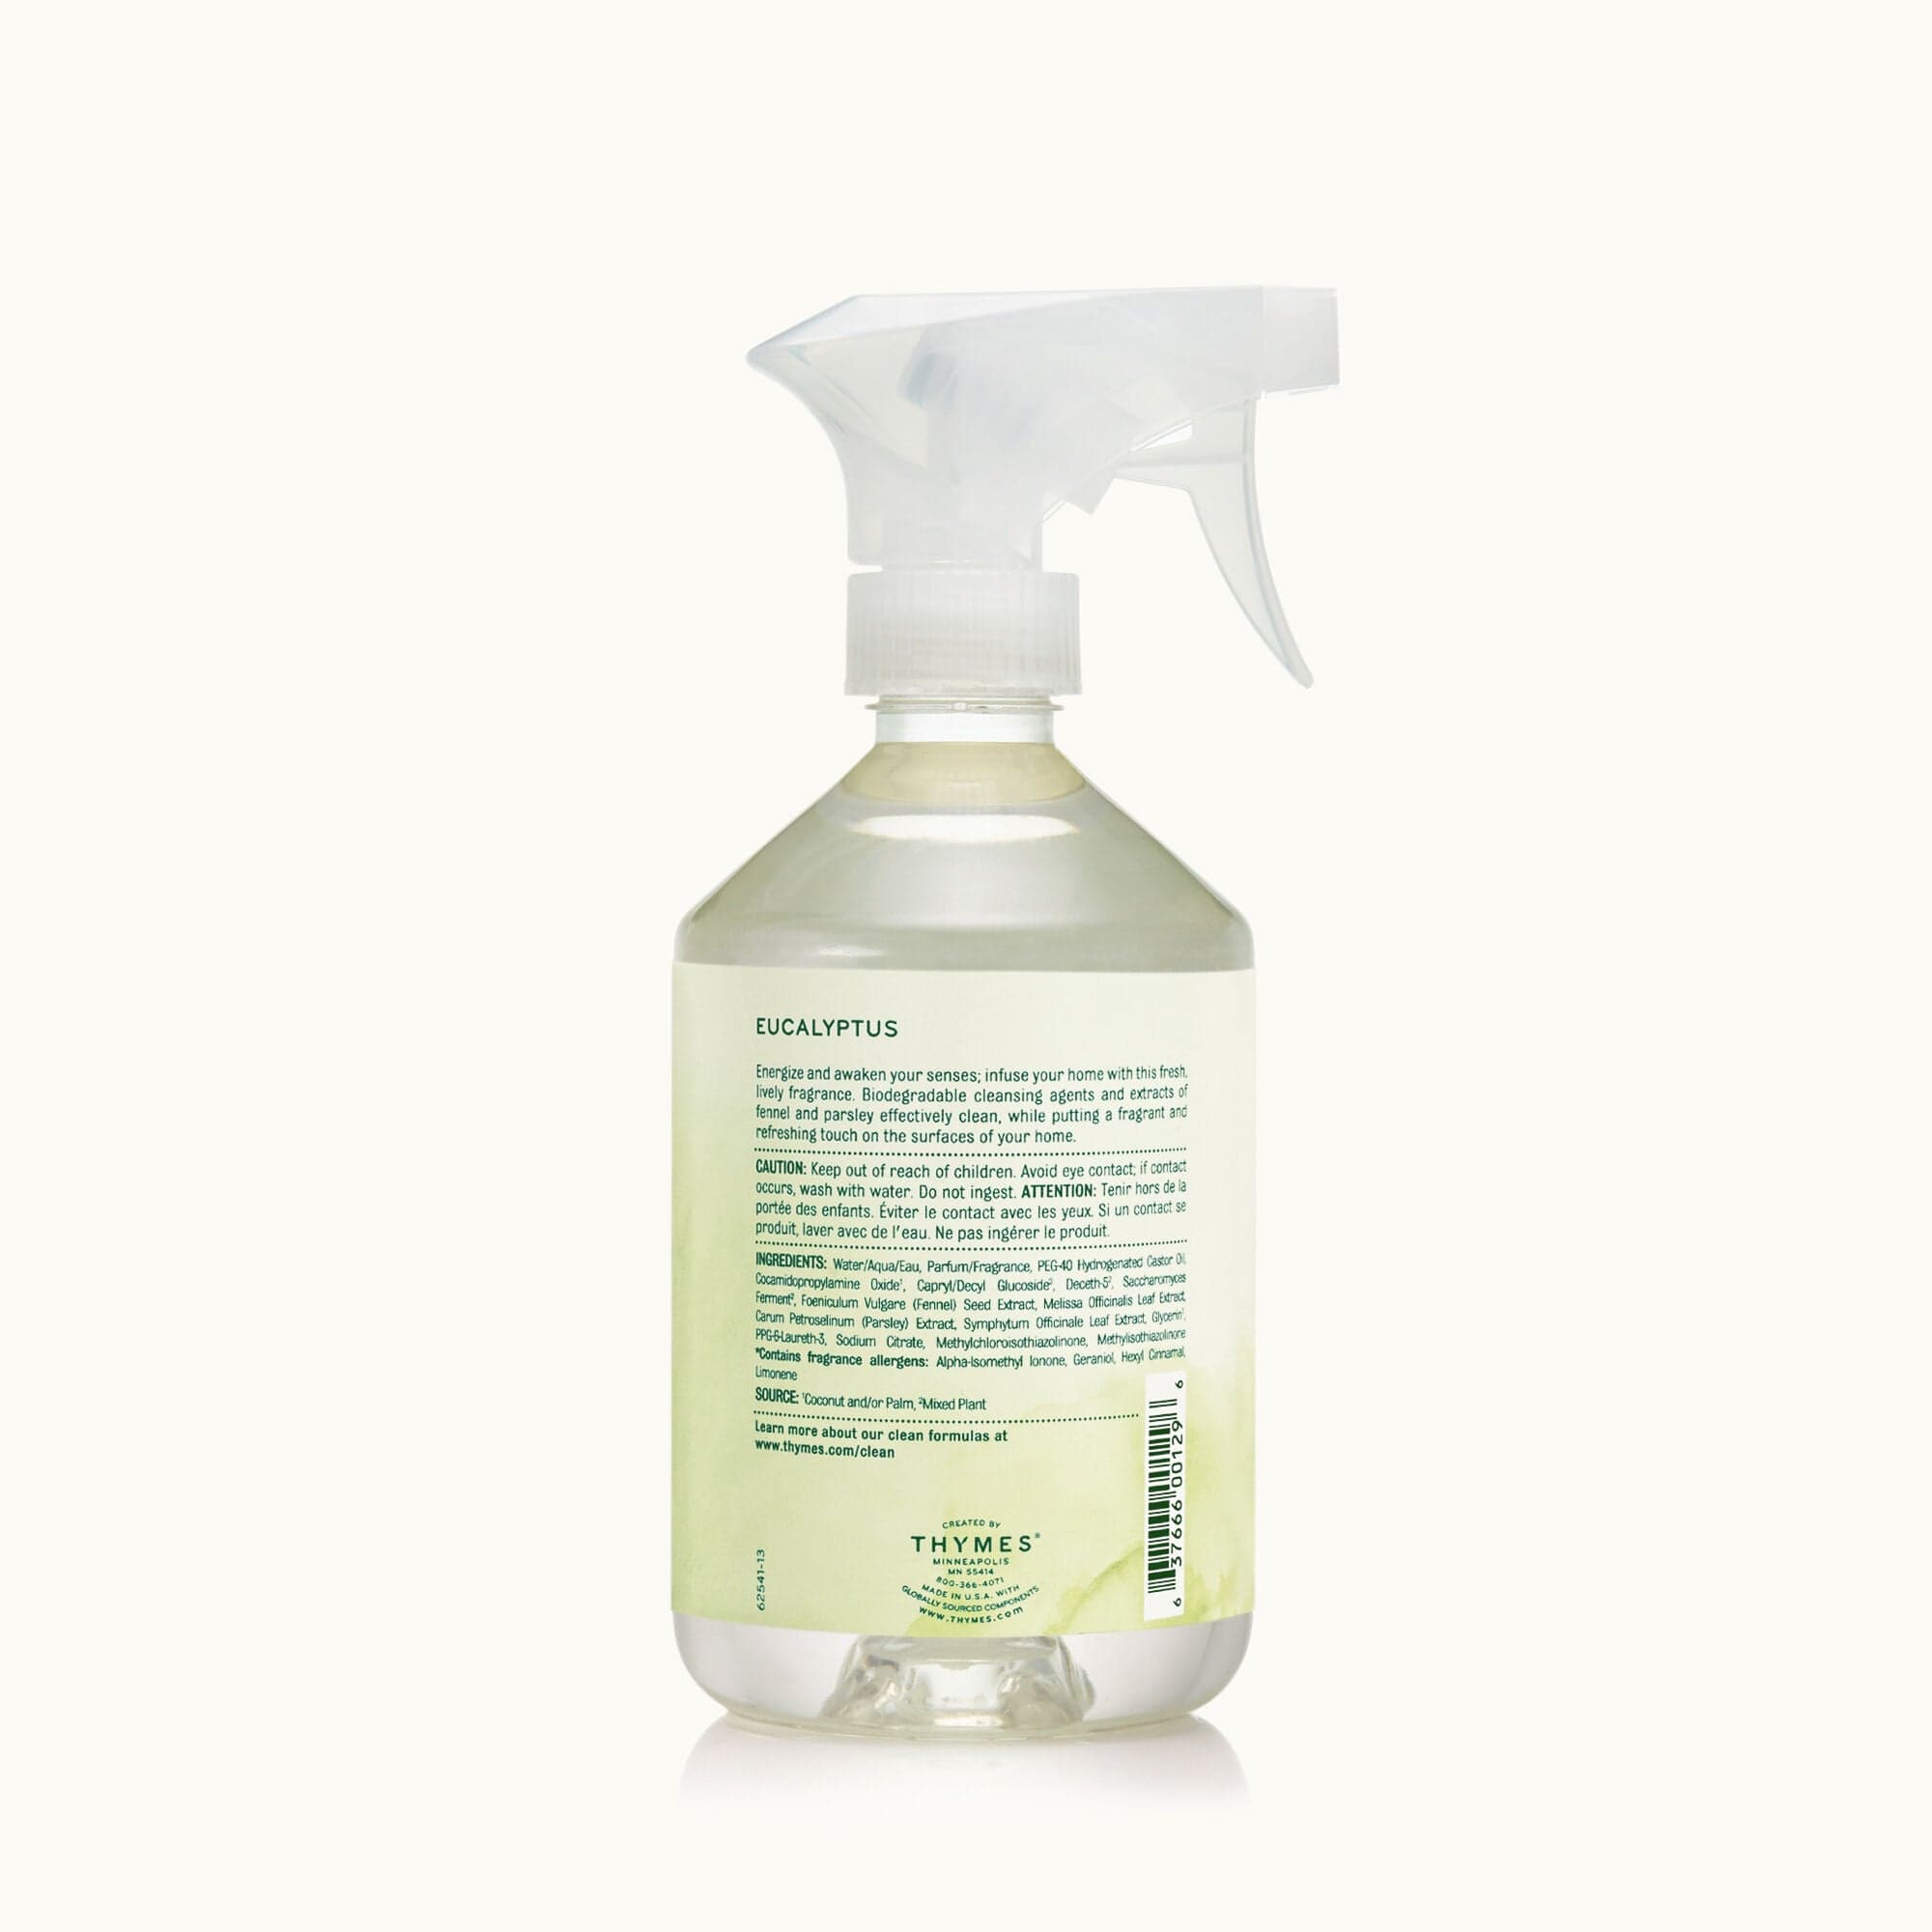 Thymes Thymes Eucalyptus Countertop Spray - Little Miss Muffin Children & Home